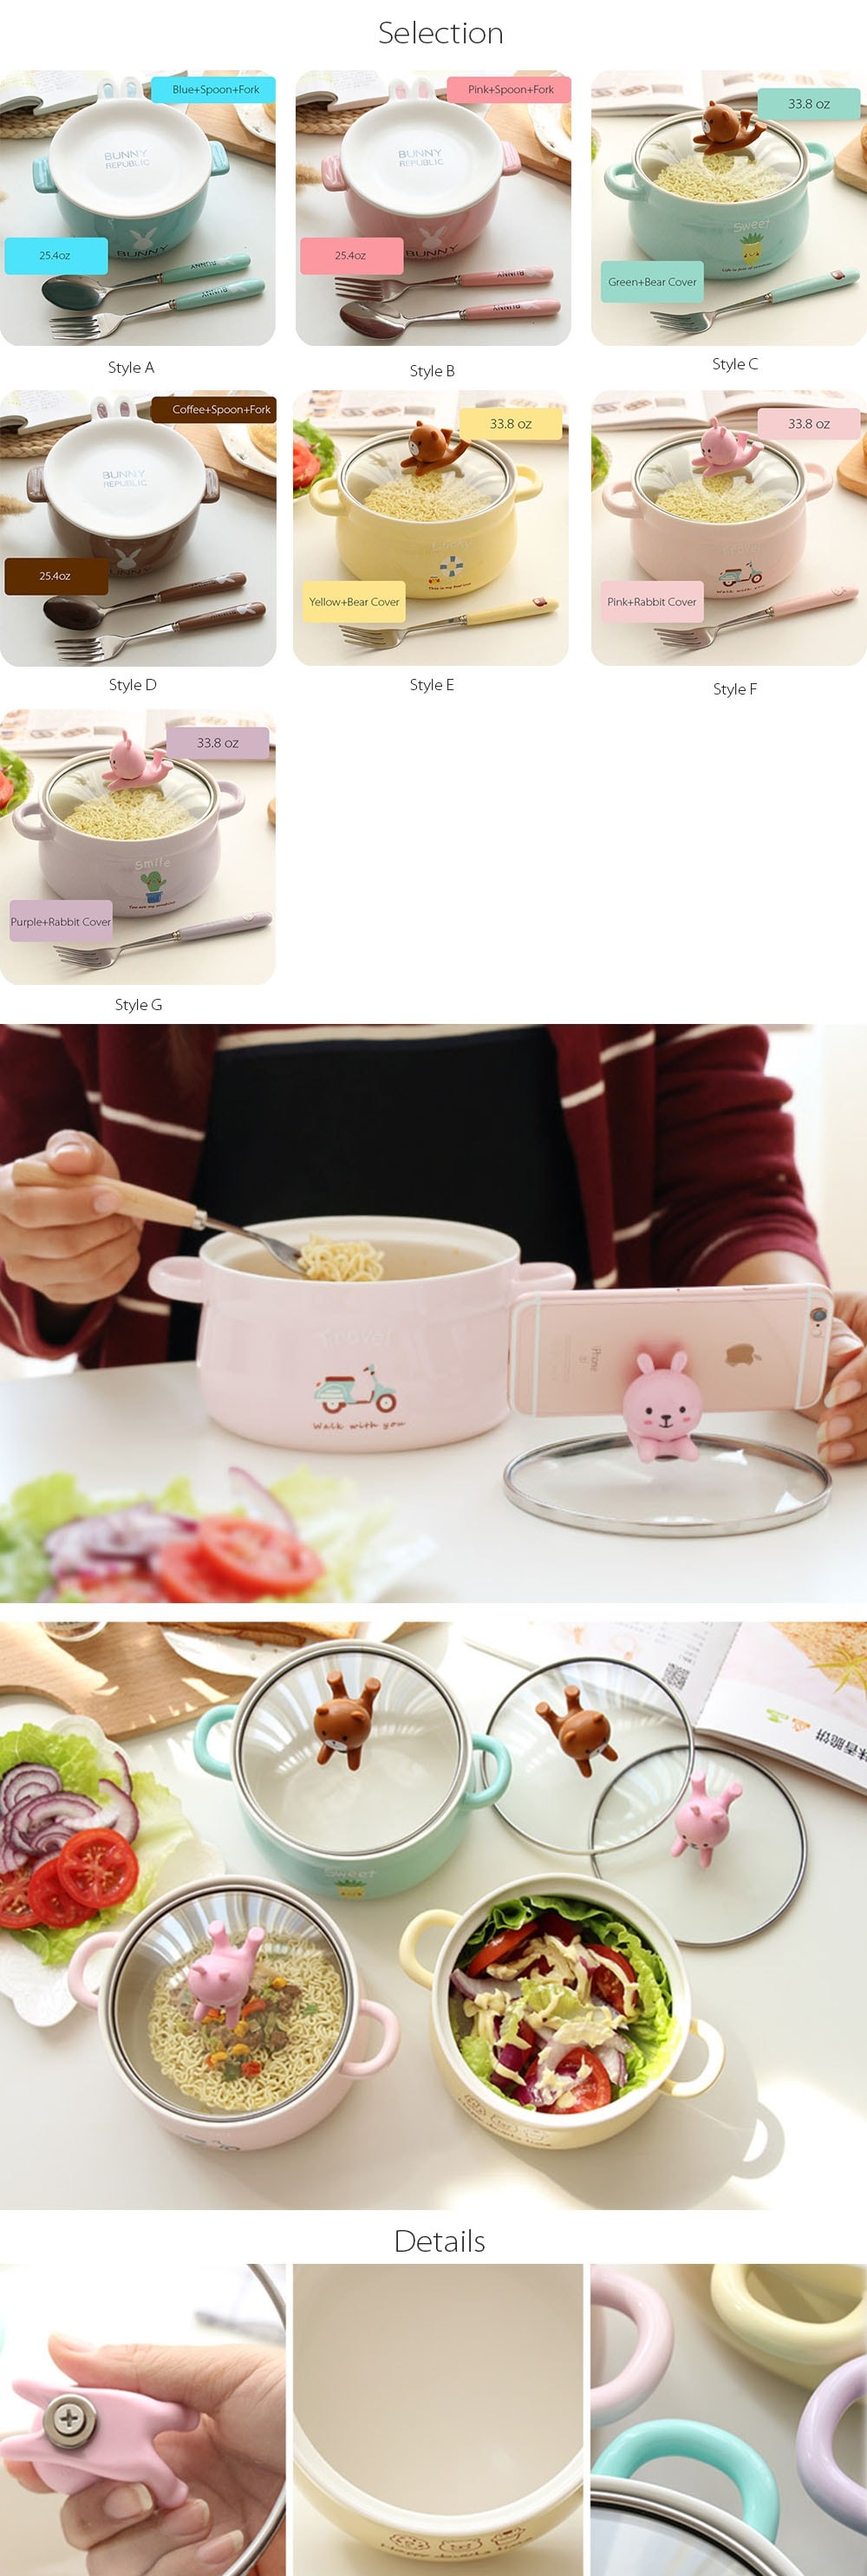 Rabbit Cartoon Porcelain Bowls With Spoon Large Microwavable Ceramic Noodle/Soup Bowls with Lid and Bowl Handle